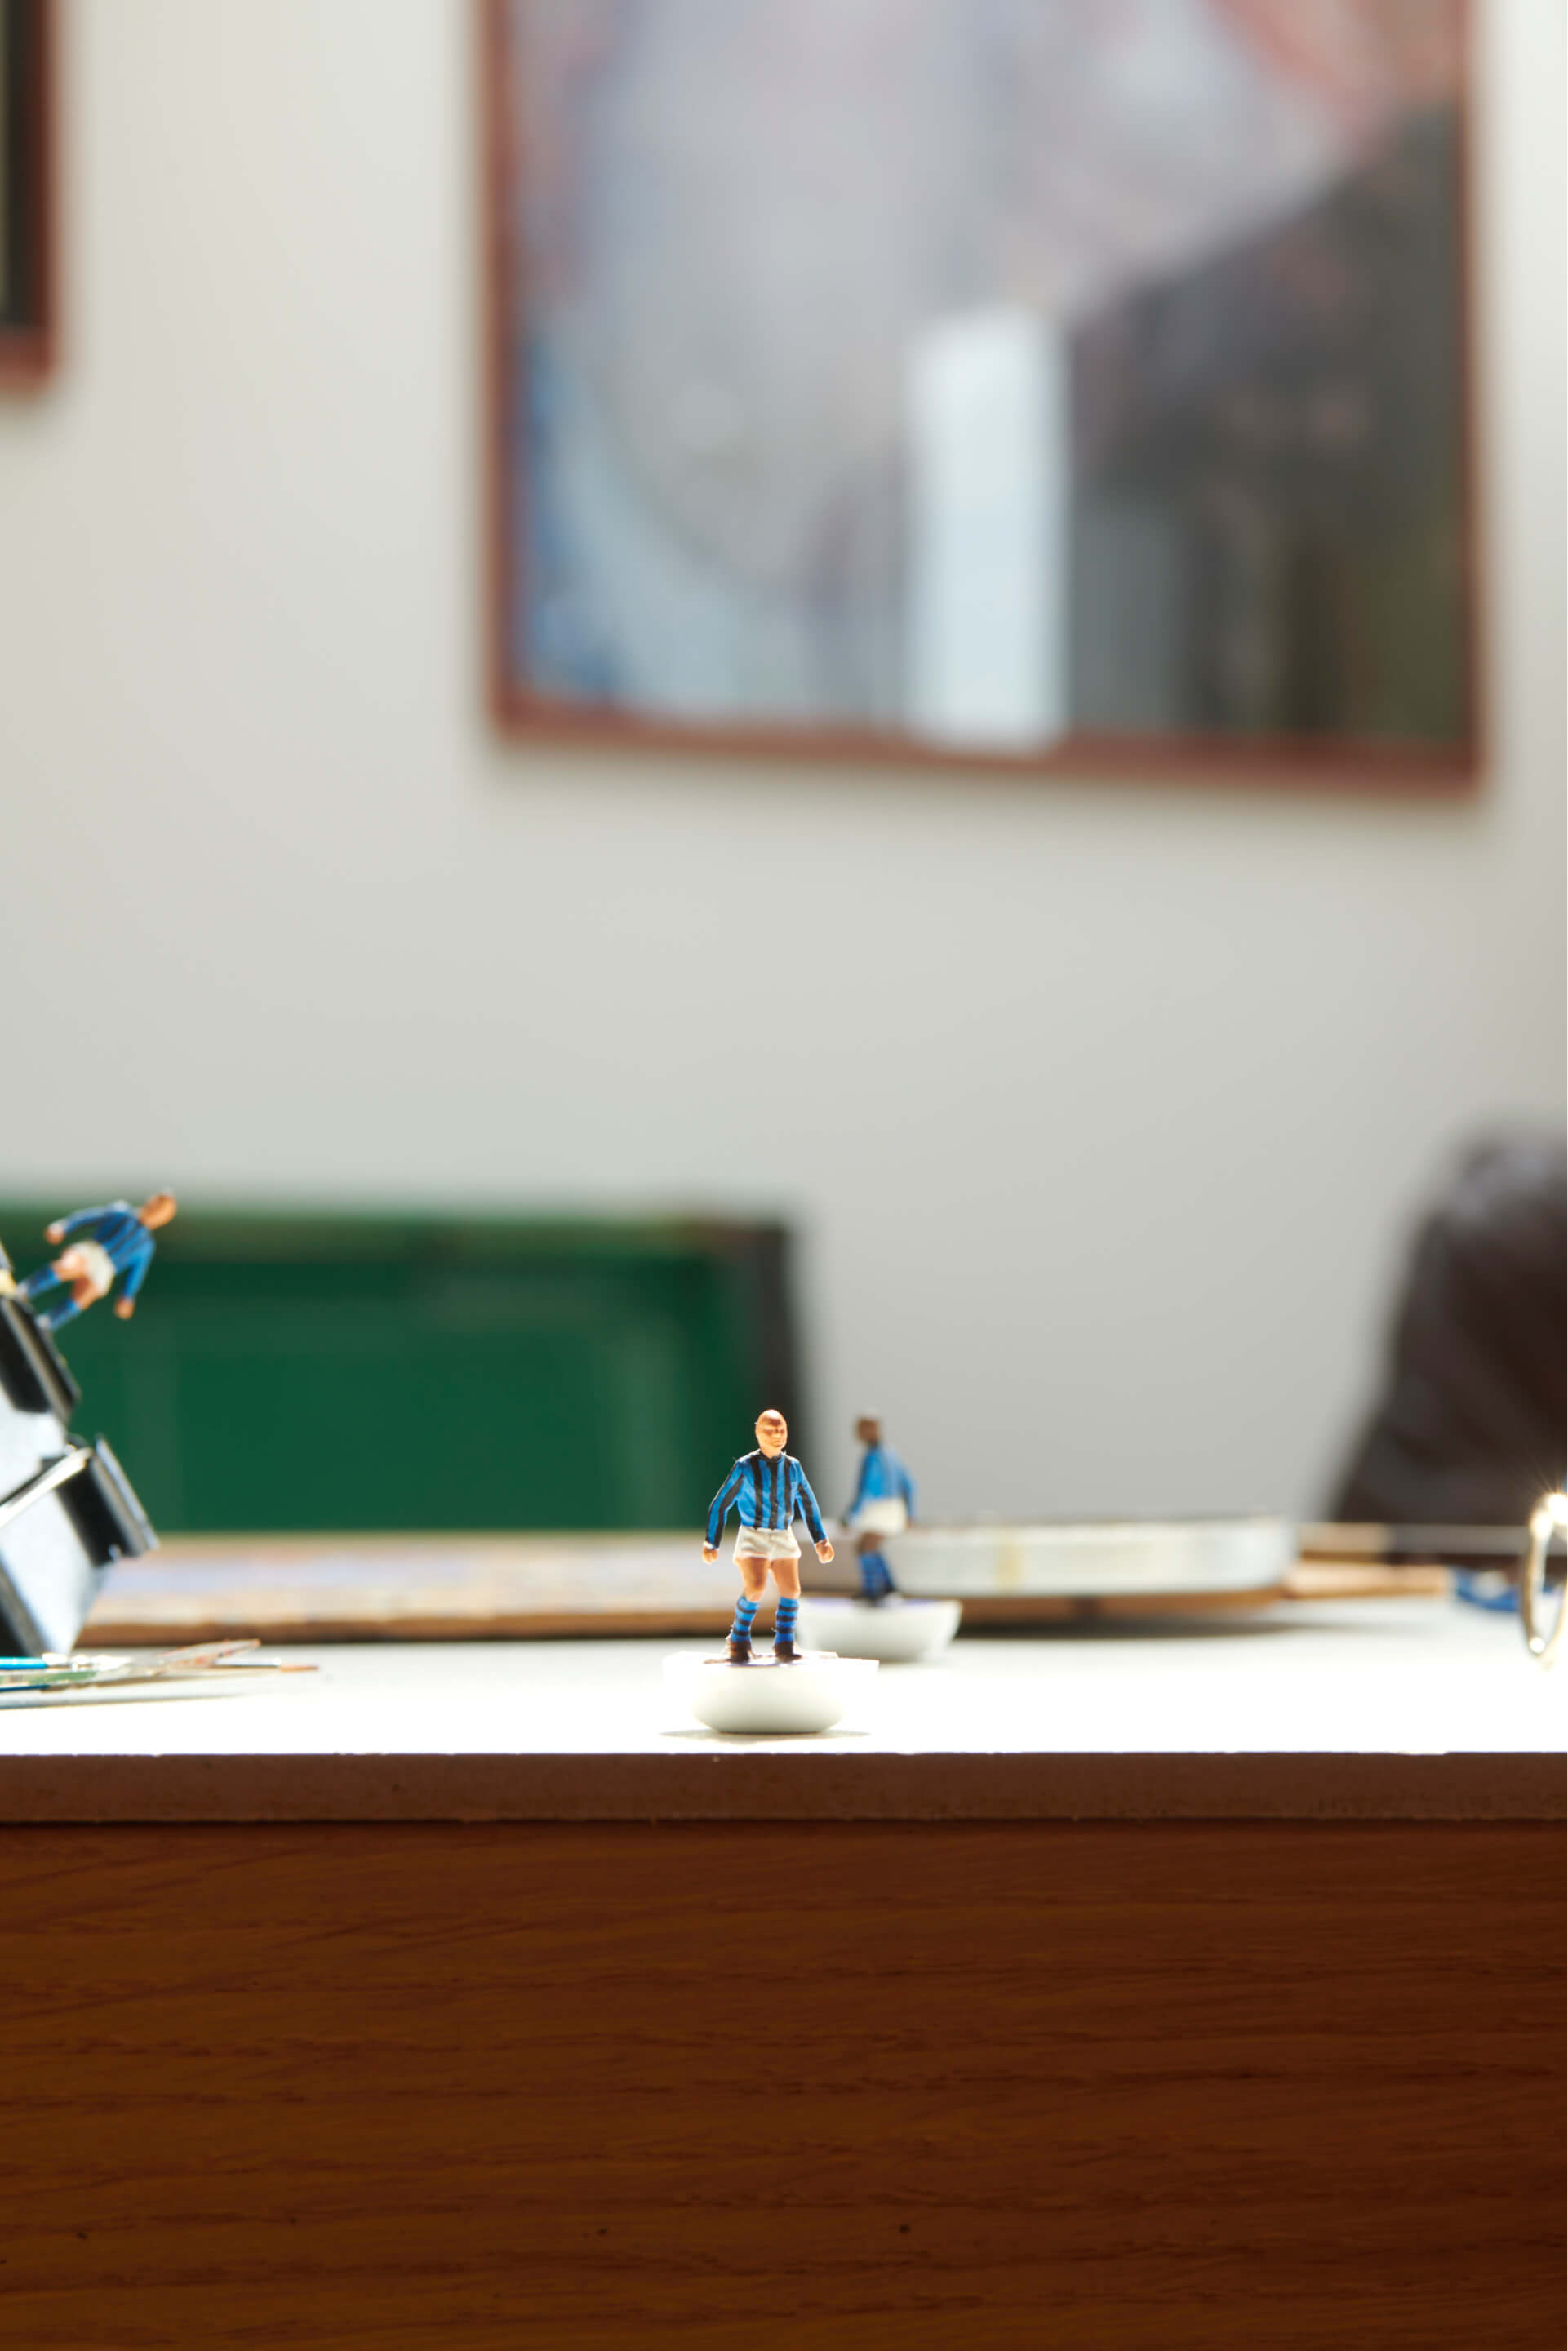 Toy figures on a table with blurred background